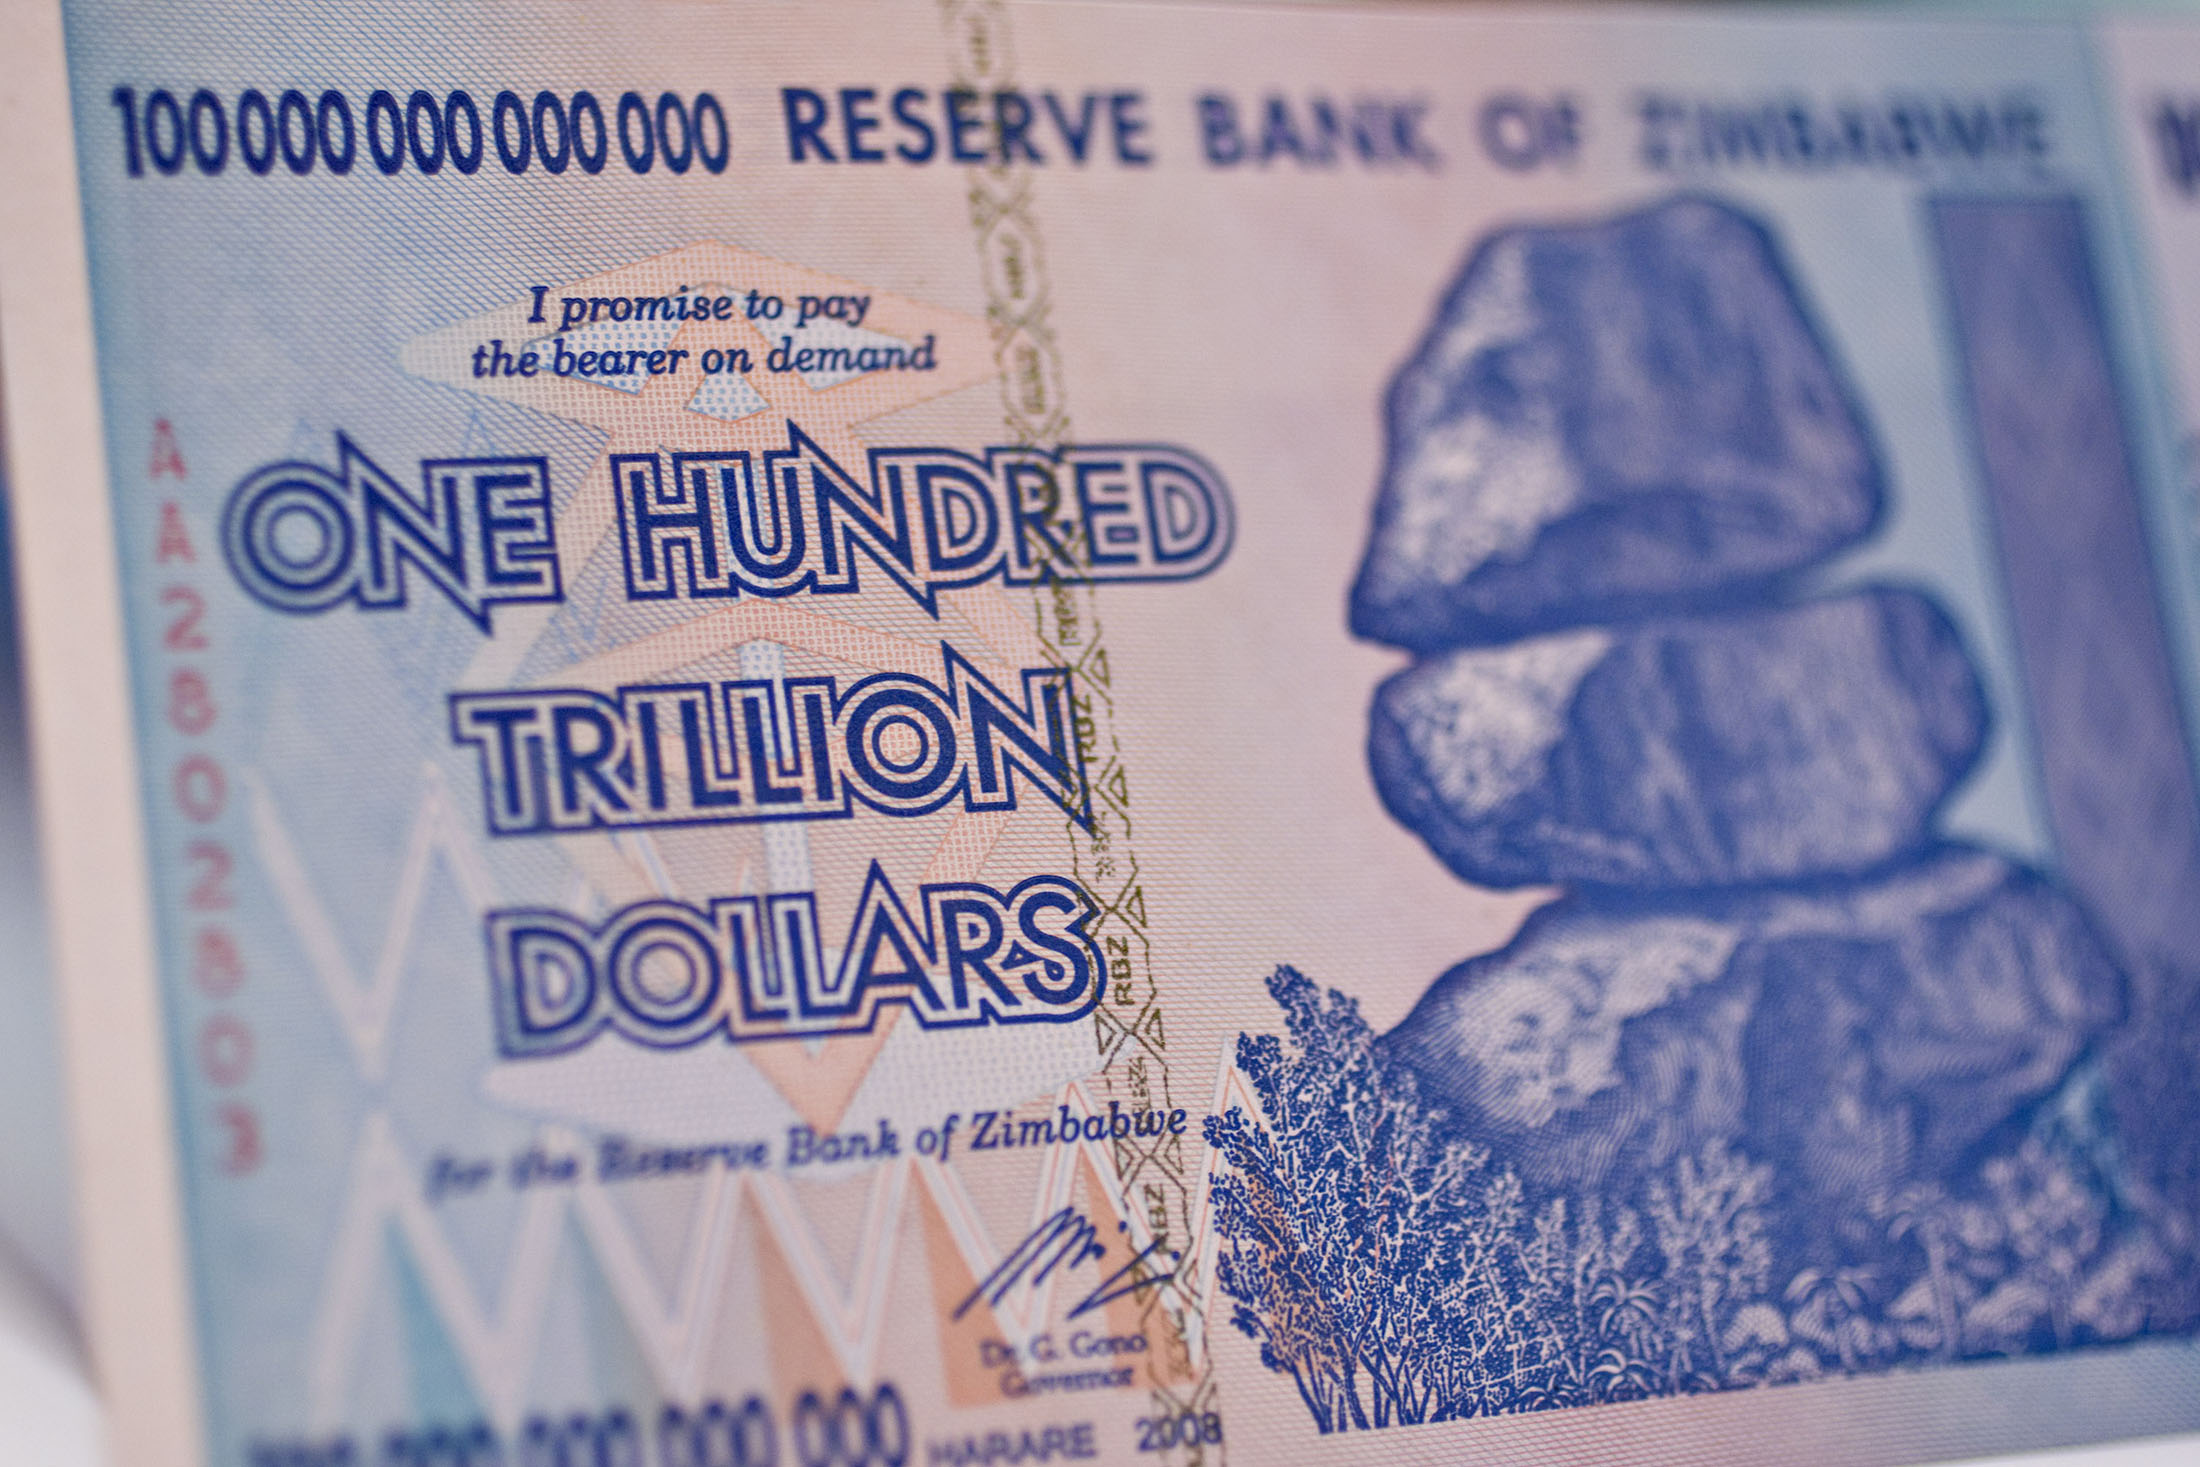 A one hundred trillion dollar Zimbabwe note issued in 2008.
